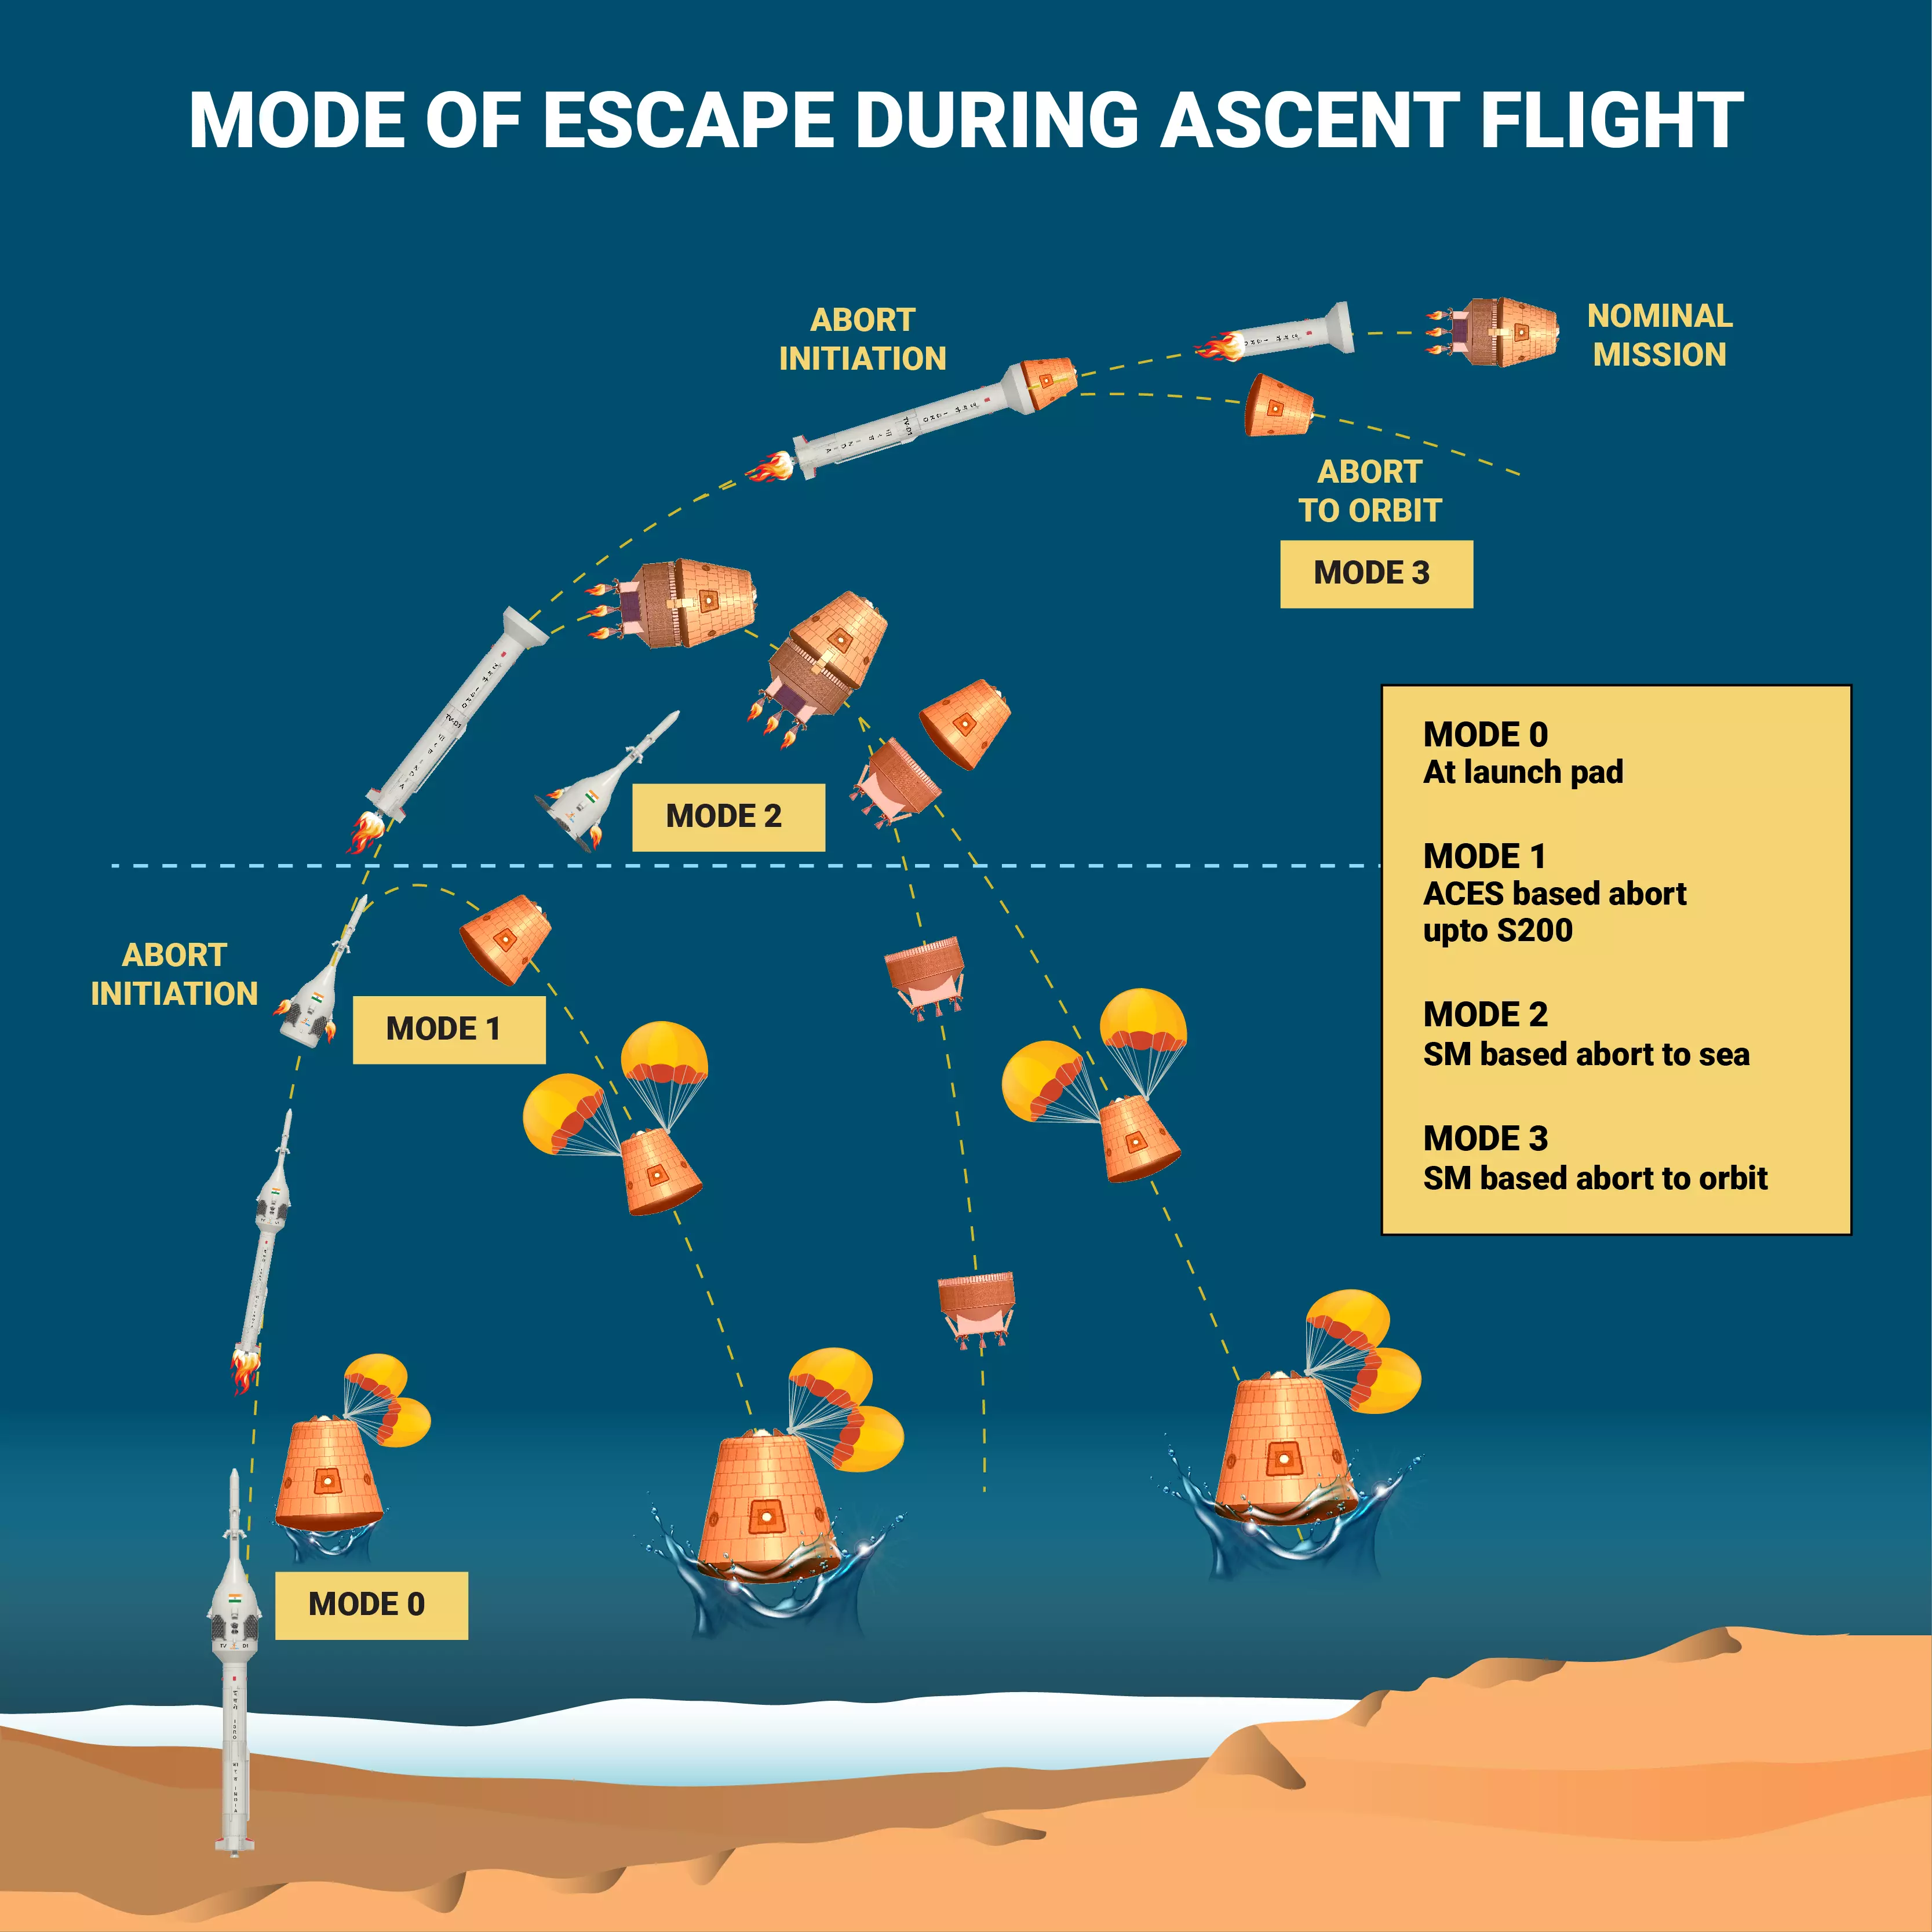 The emergency abort situation can occur at different stages of the flight. Specific escape mechanisms are required.